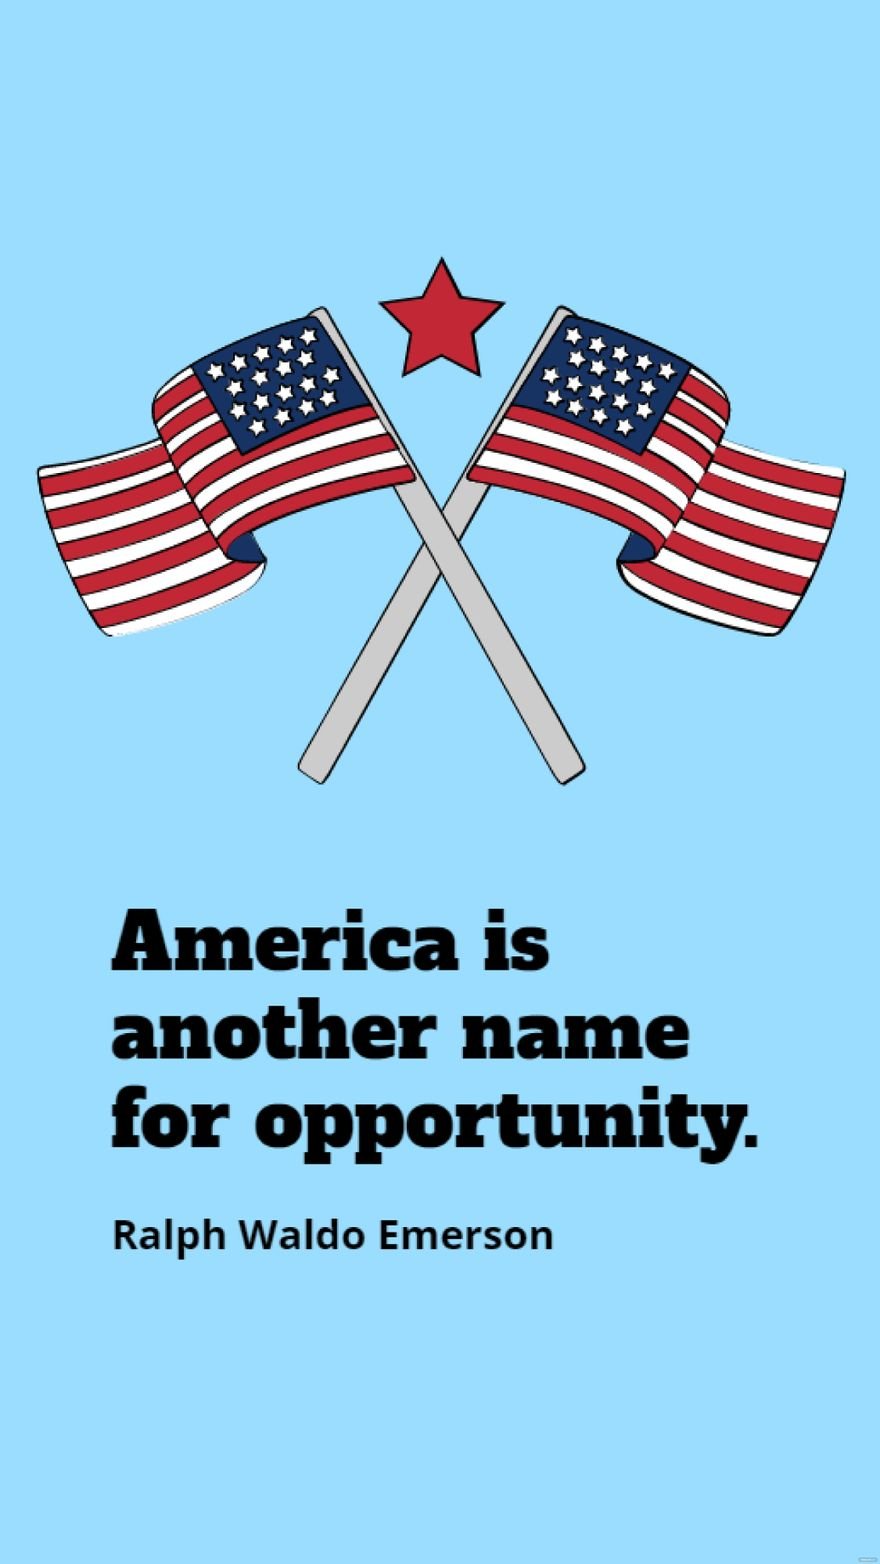 Free Ralph Waldo Emerson - America is another name for opportunity.